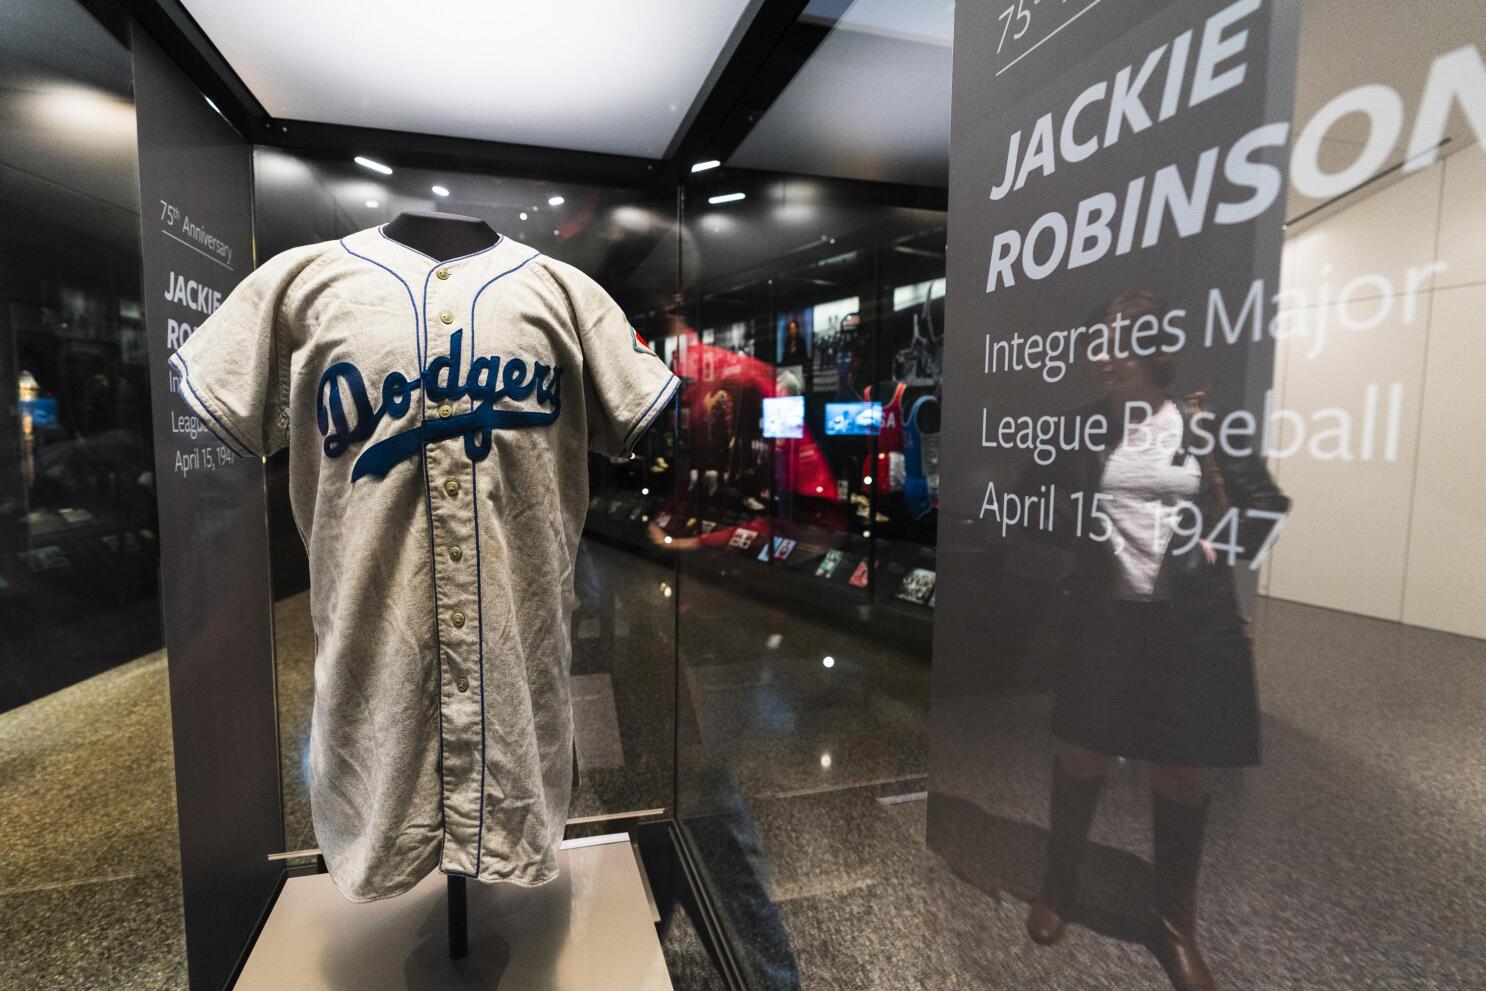 Celebrating the 75th anniversary of Jackie Robinson breaking